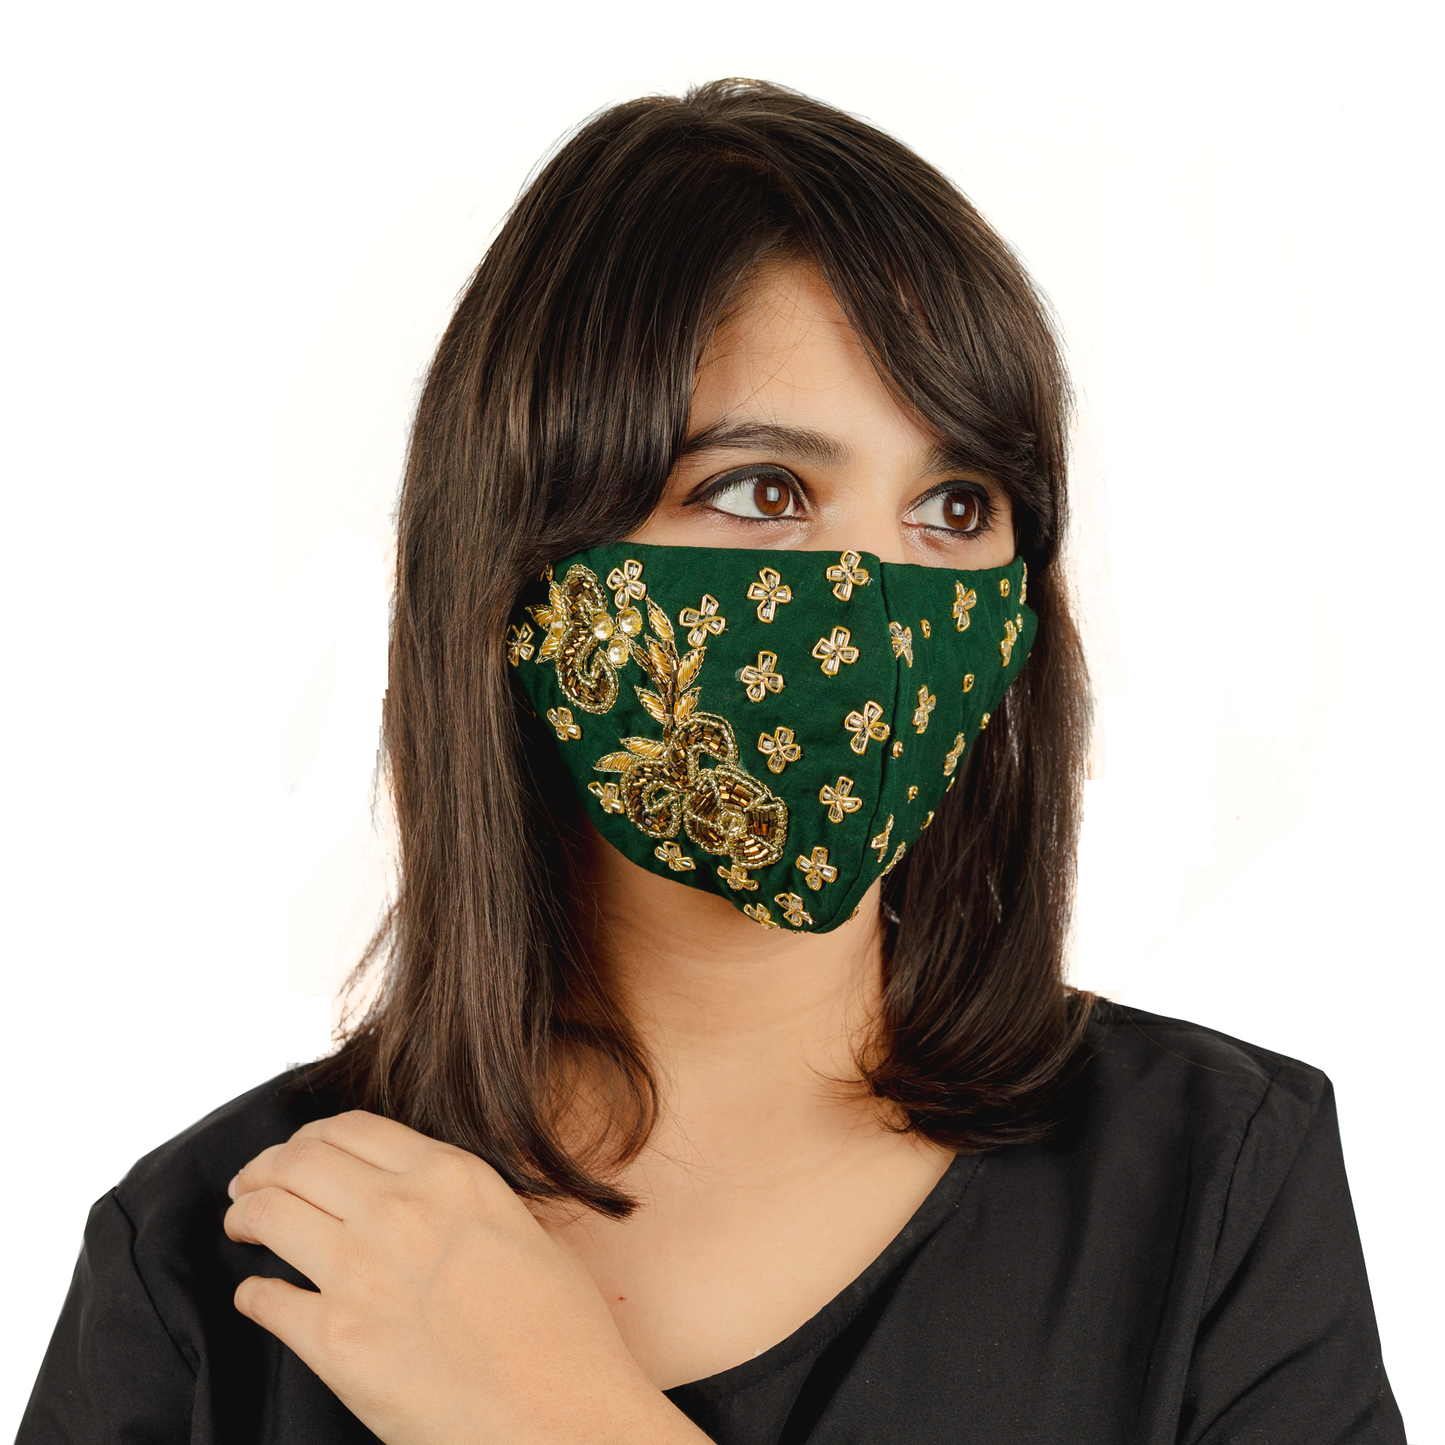 Emerald Green Cotton Face Mask with Floral Embroidery - Maxim Creation